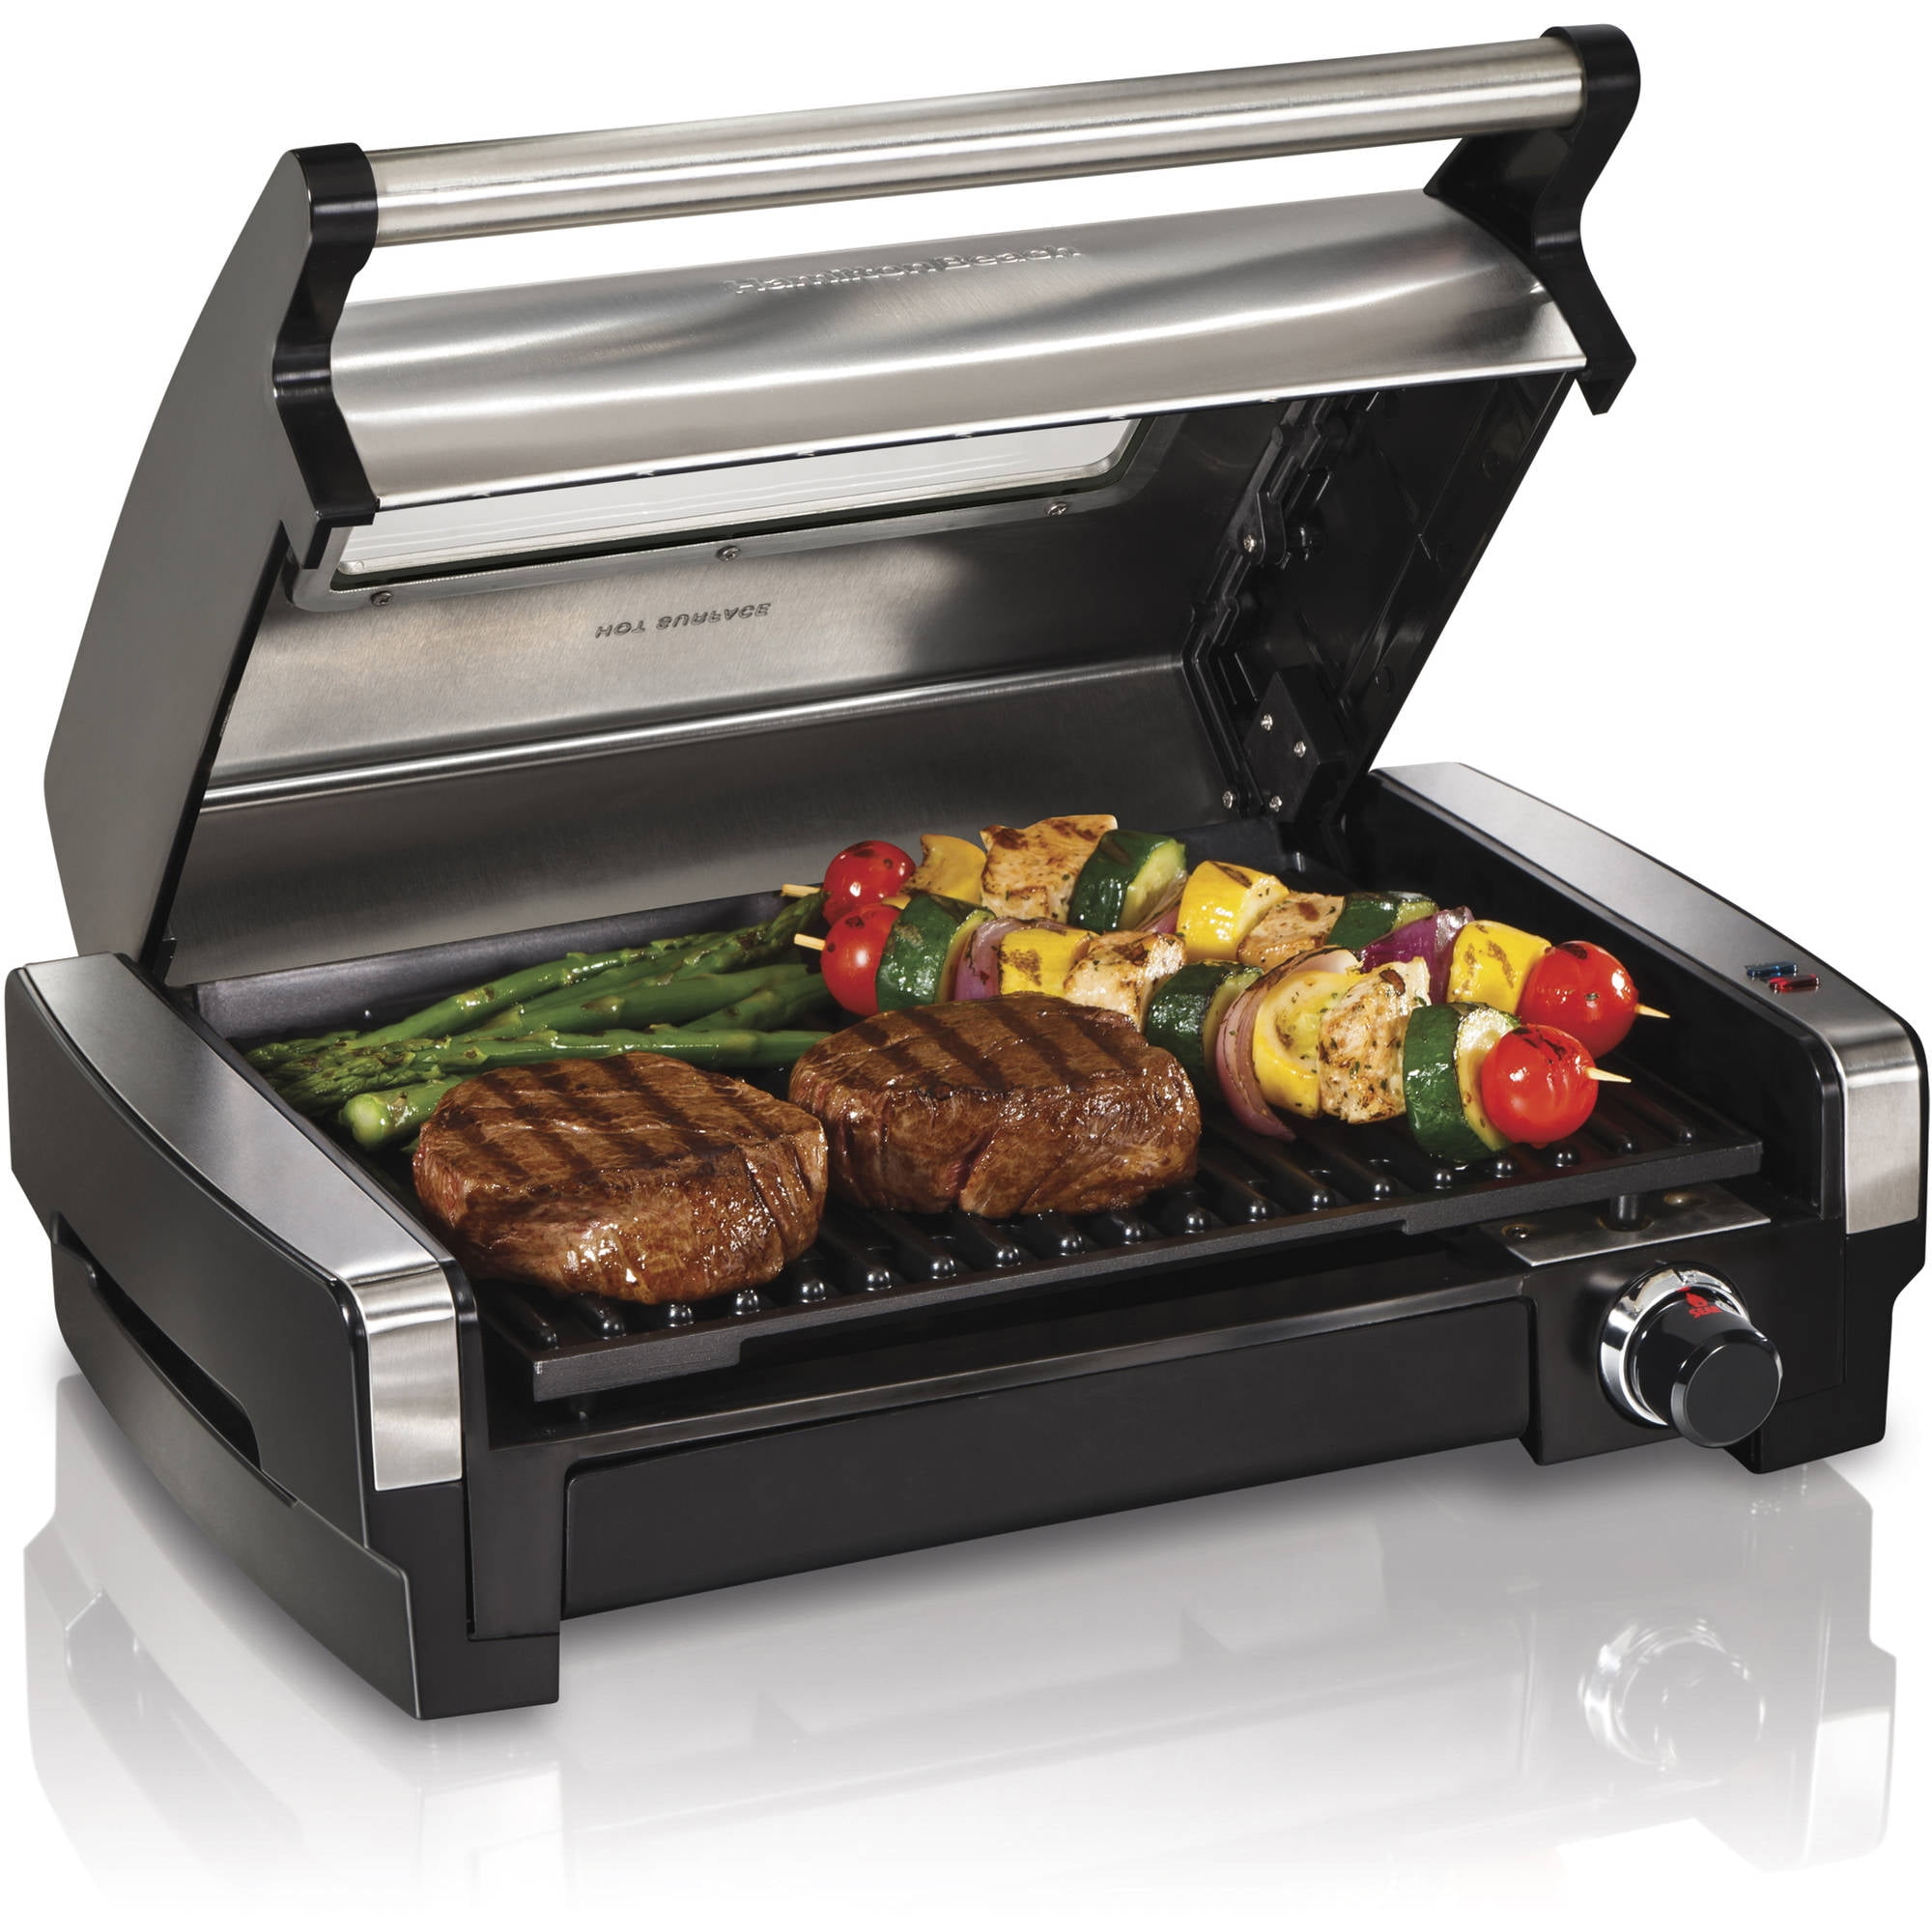 Hamilton Beach Electric Indoor Searing Grill with Viewing Window, Removable Easy to Clean Nonstick Plate, 6-Serving, Extra-Large Drip Tray, Stainless Steel, 25361 - image 1 of 5